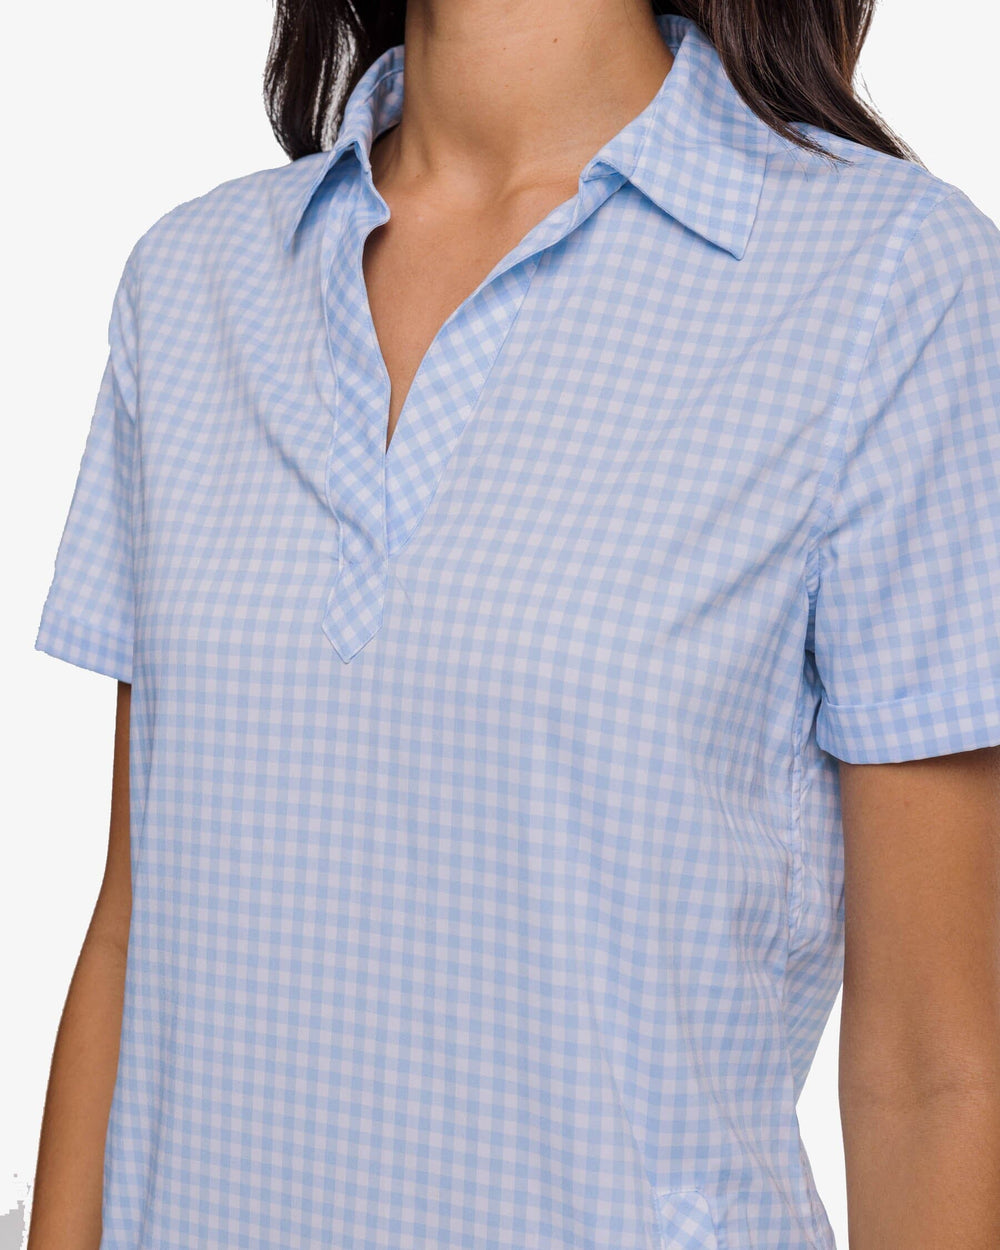 The top detail view of the Southern Tide Kamryn brrr°® Intercoastal Gingham Dress by Southern Tide - Sky Blue